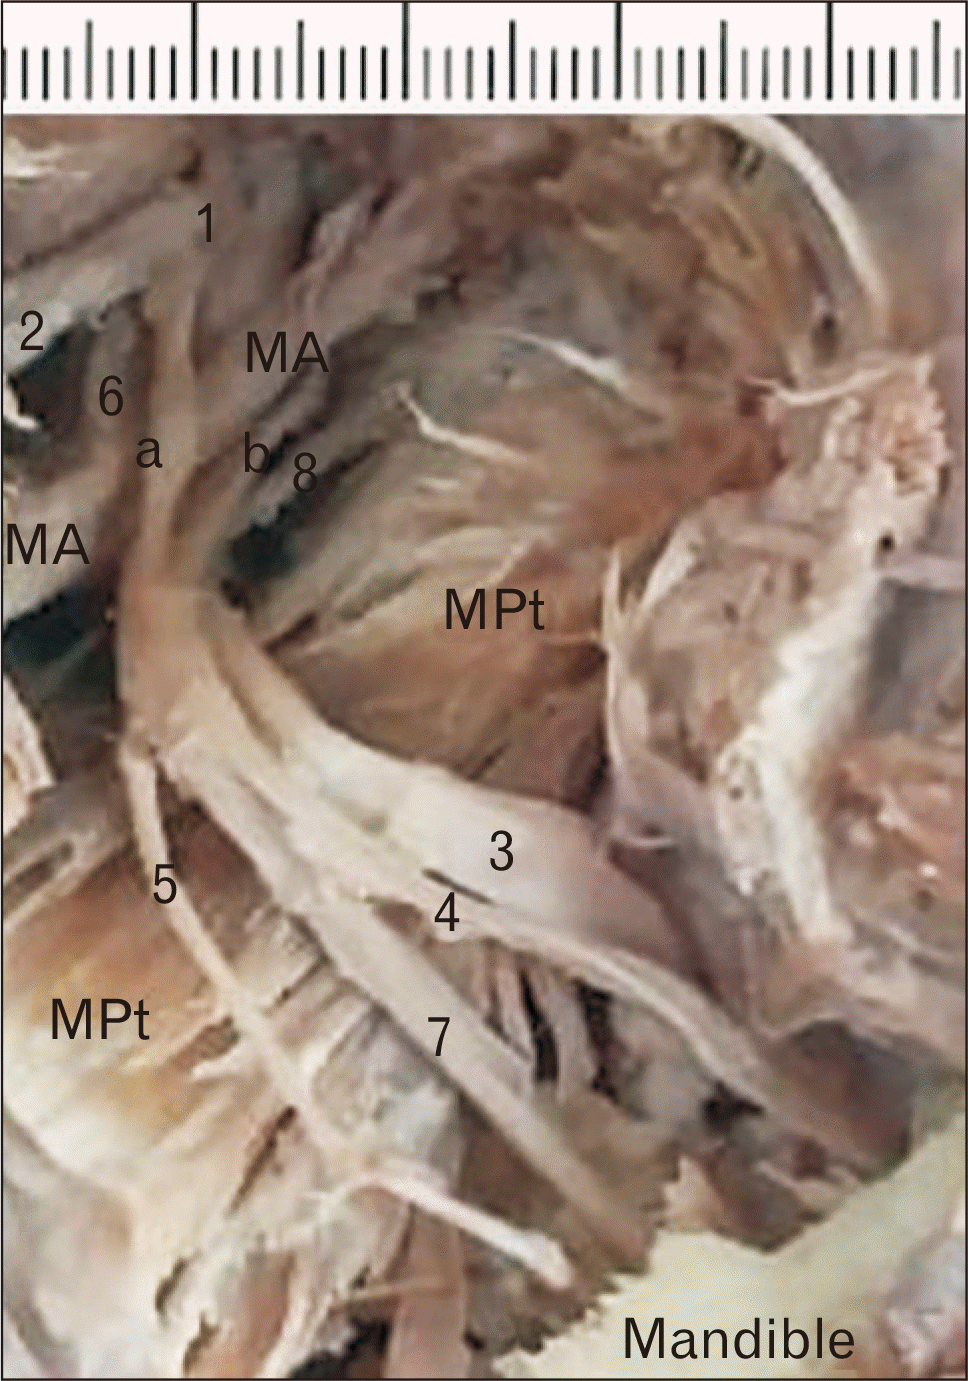 a) Anatomic overview of the posterior division of the mandibular nerve